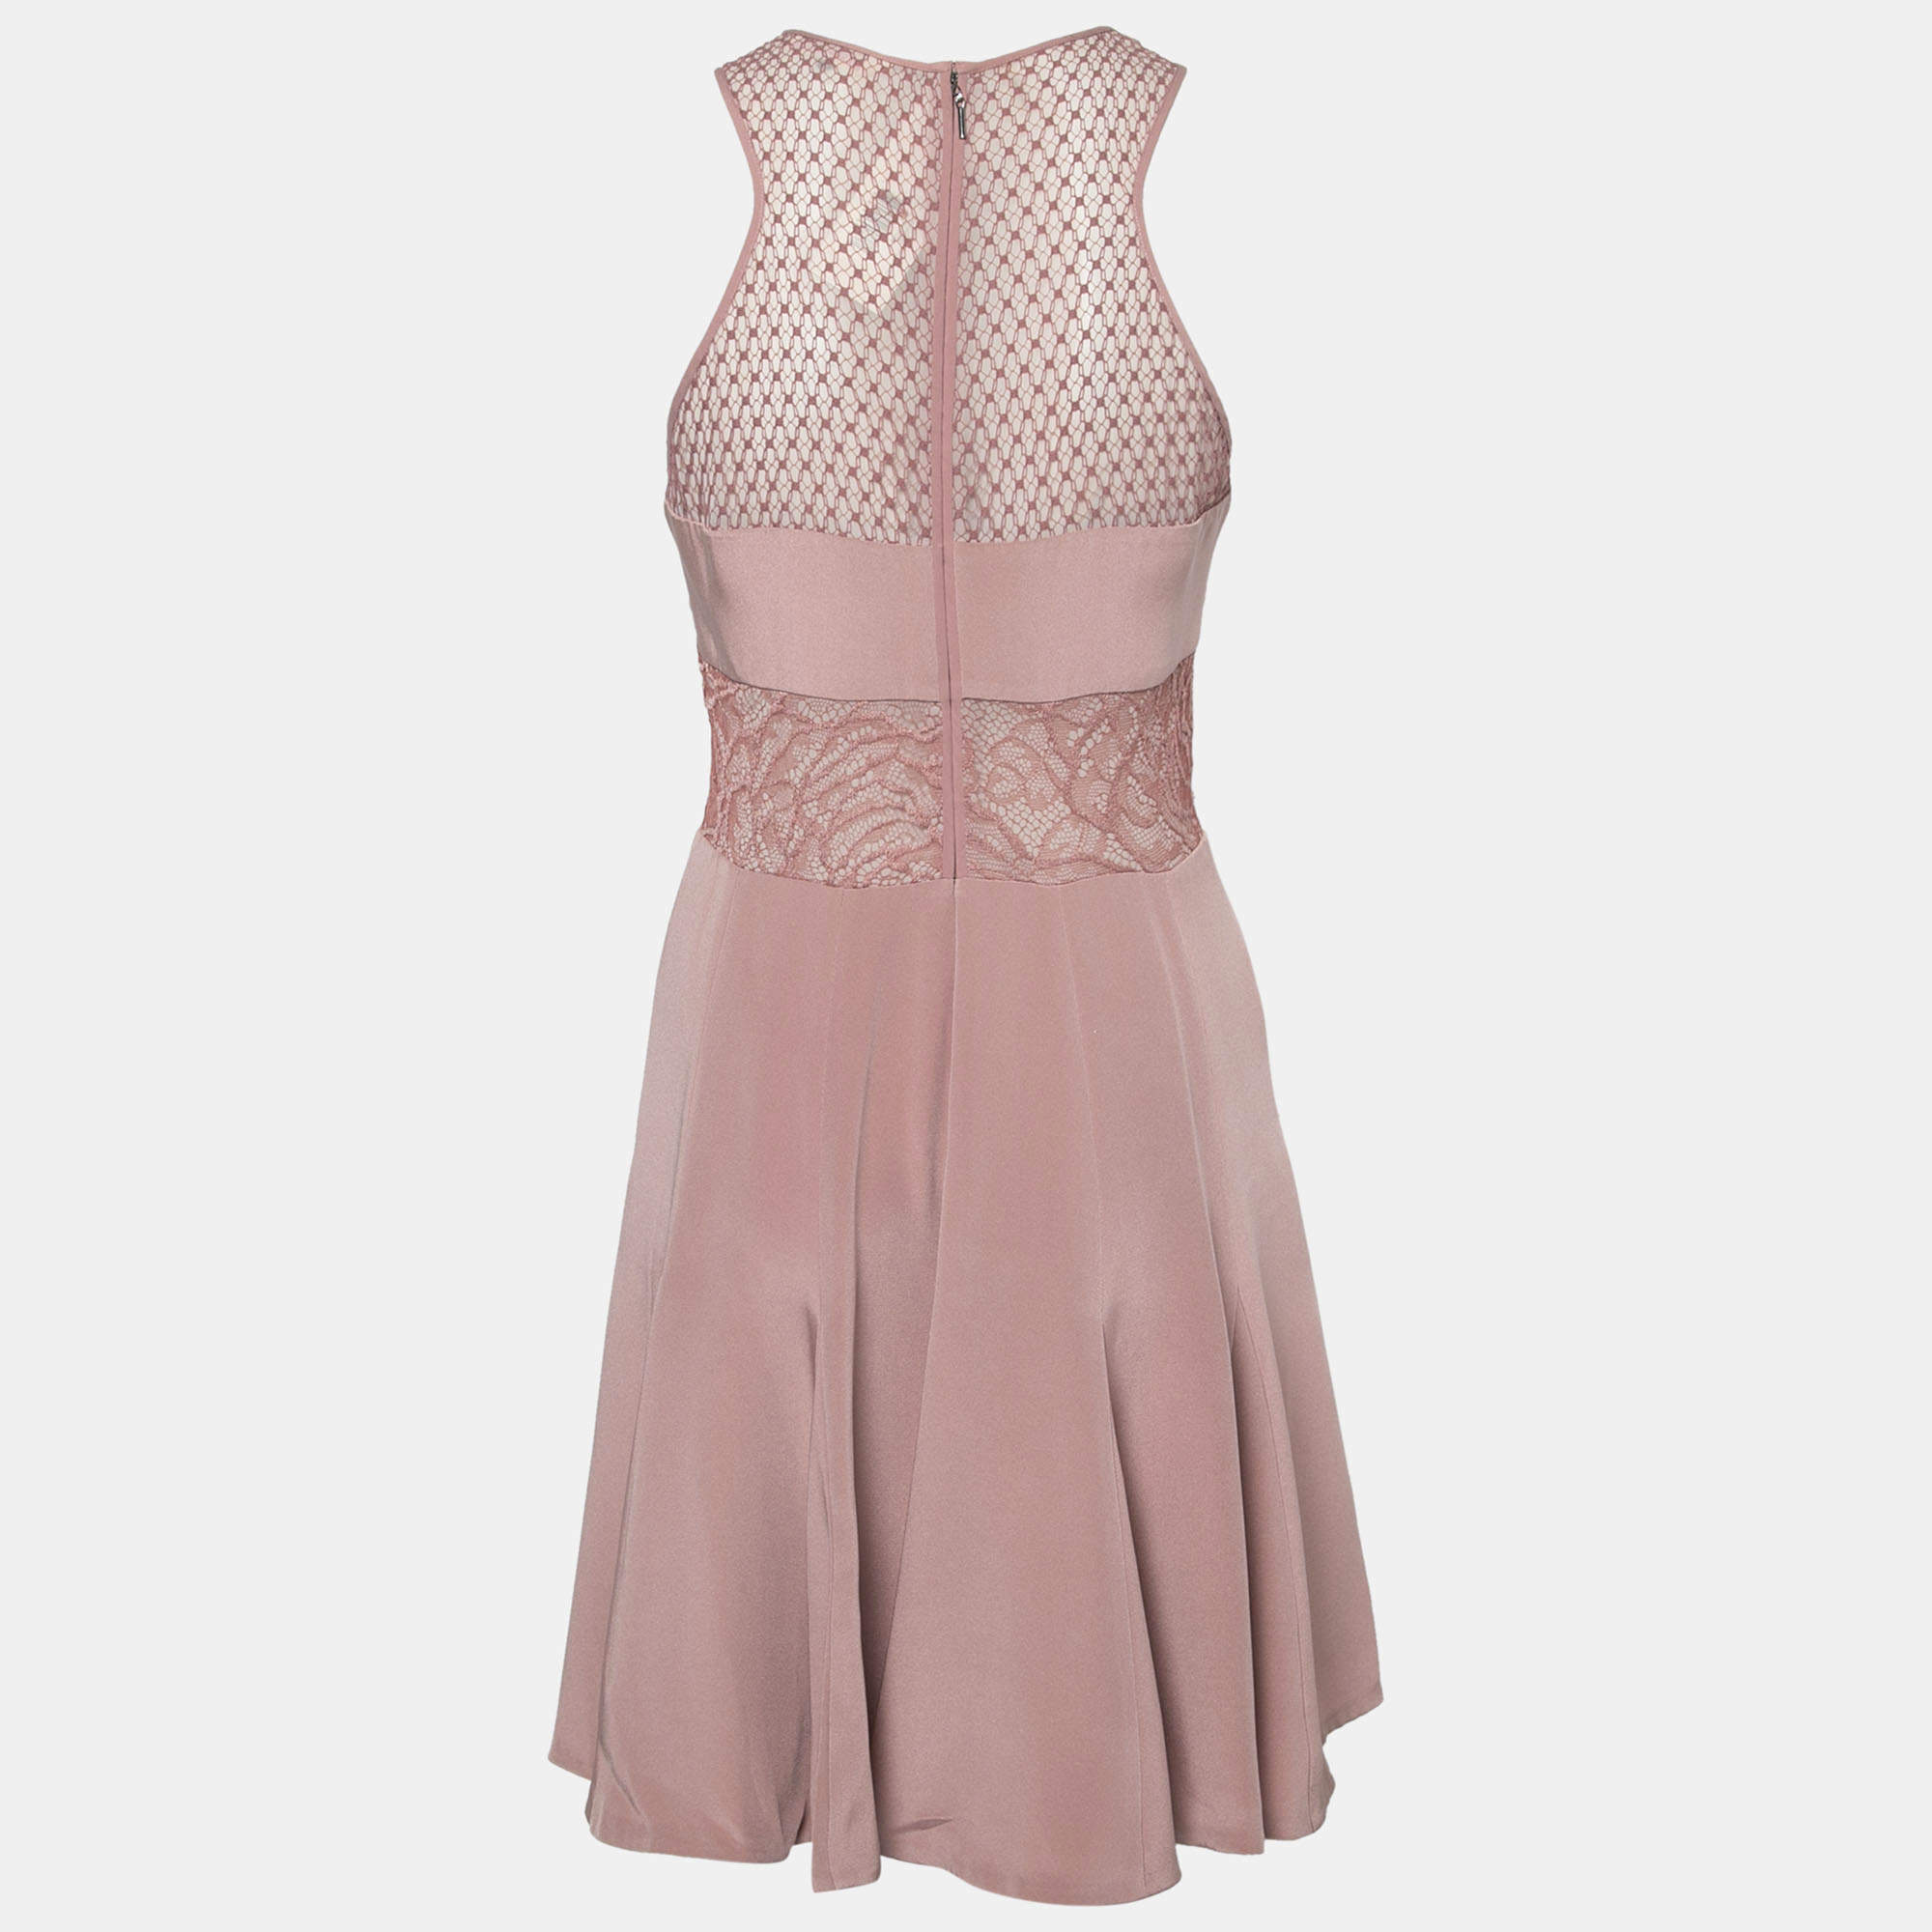 Rebecca Taylor Blush Pink Silk Lace Insert Pleated Cocktail Dress